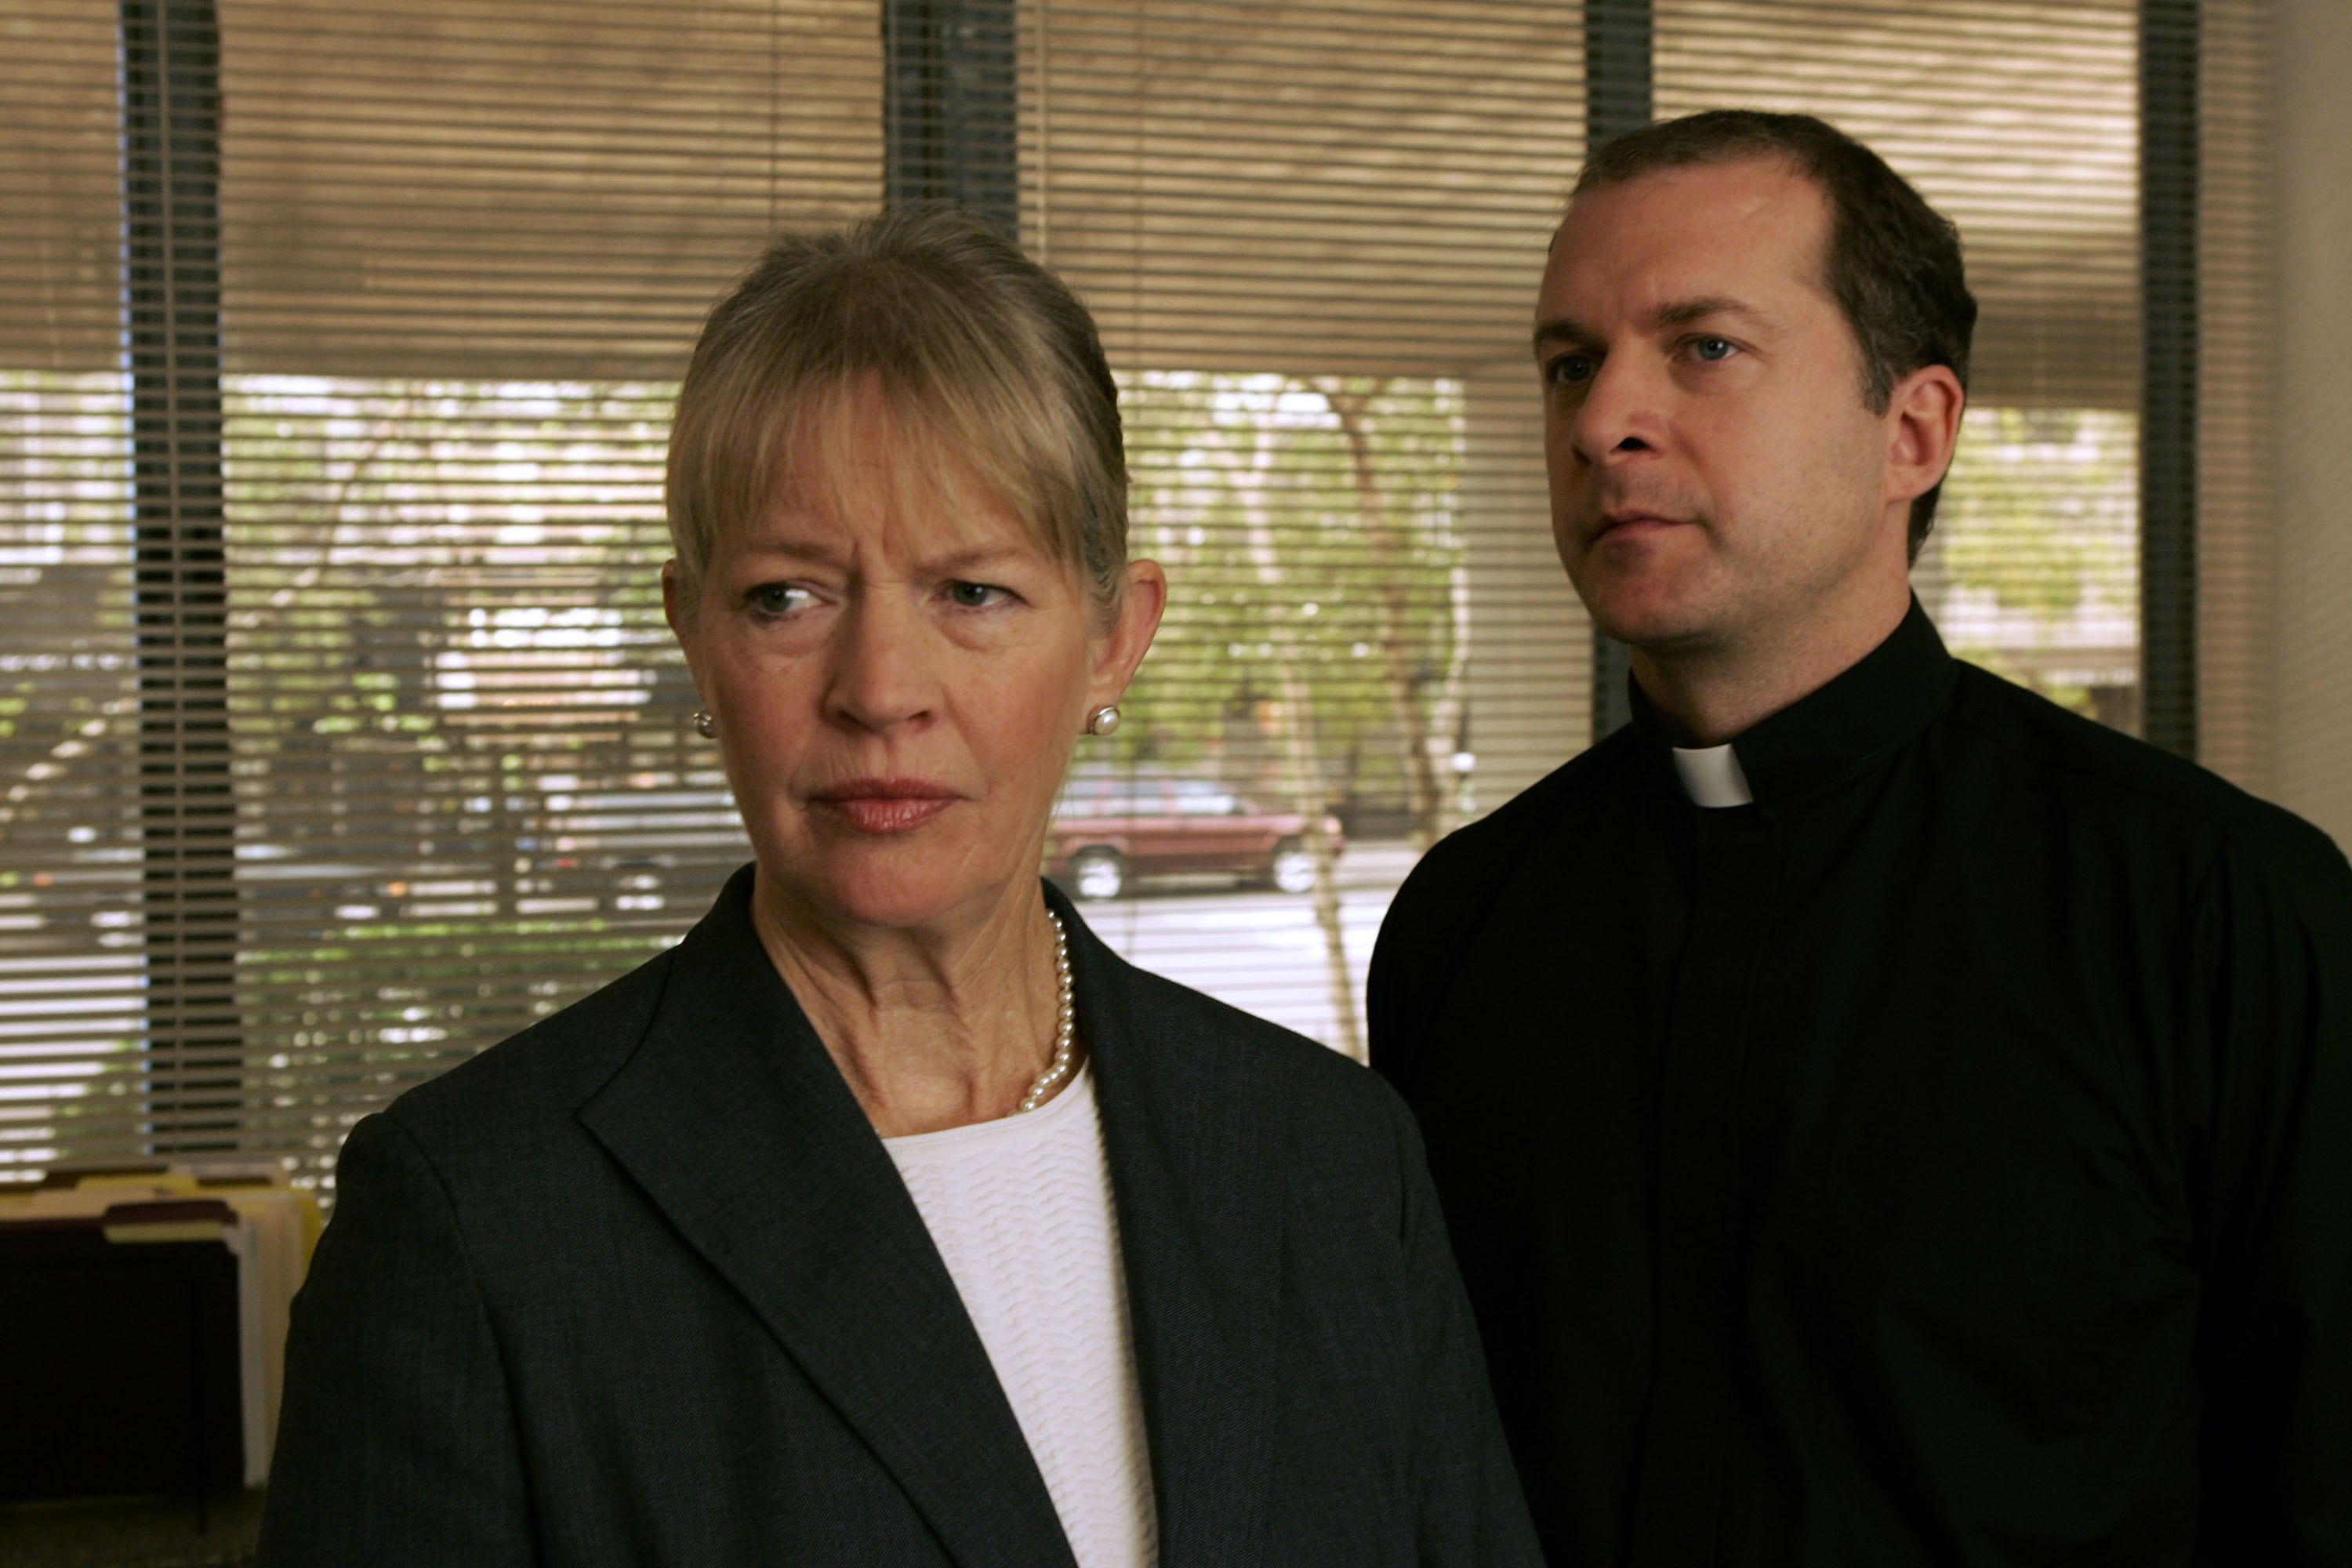 Dorothy Lyman as Principal Parker and Daniel Jenkins as Father Justin Miller on "Law & Order: Special Victims Unit" on October 24, 2005 | Source: Getty Images